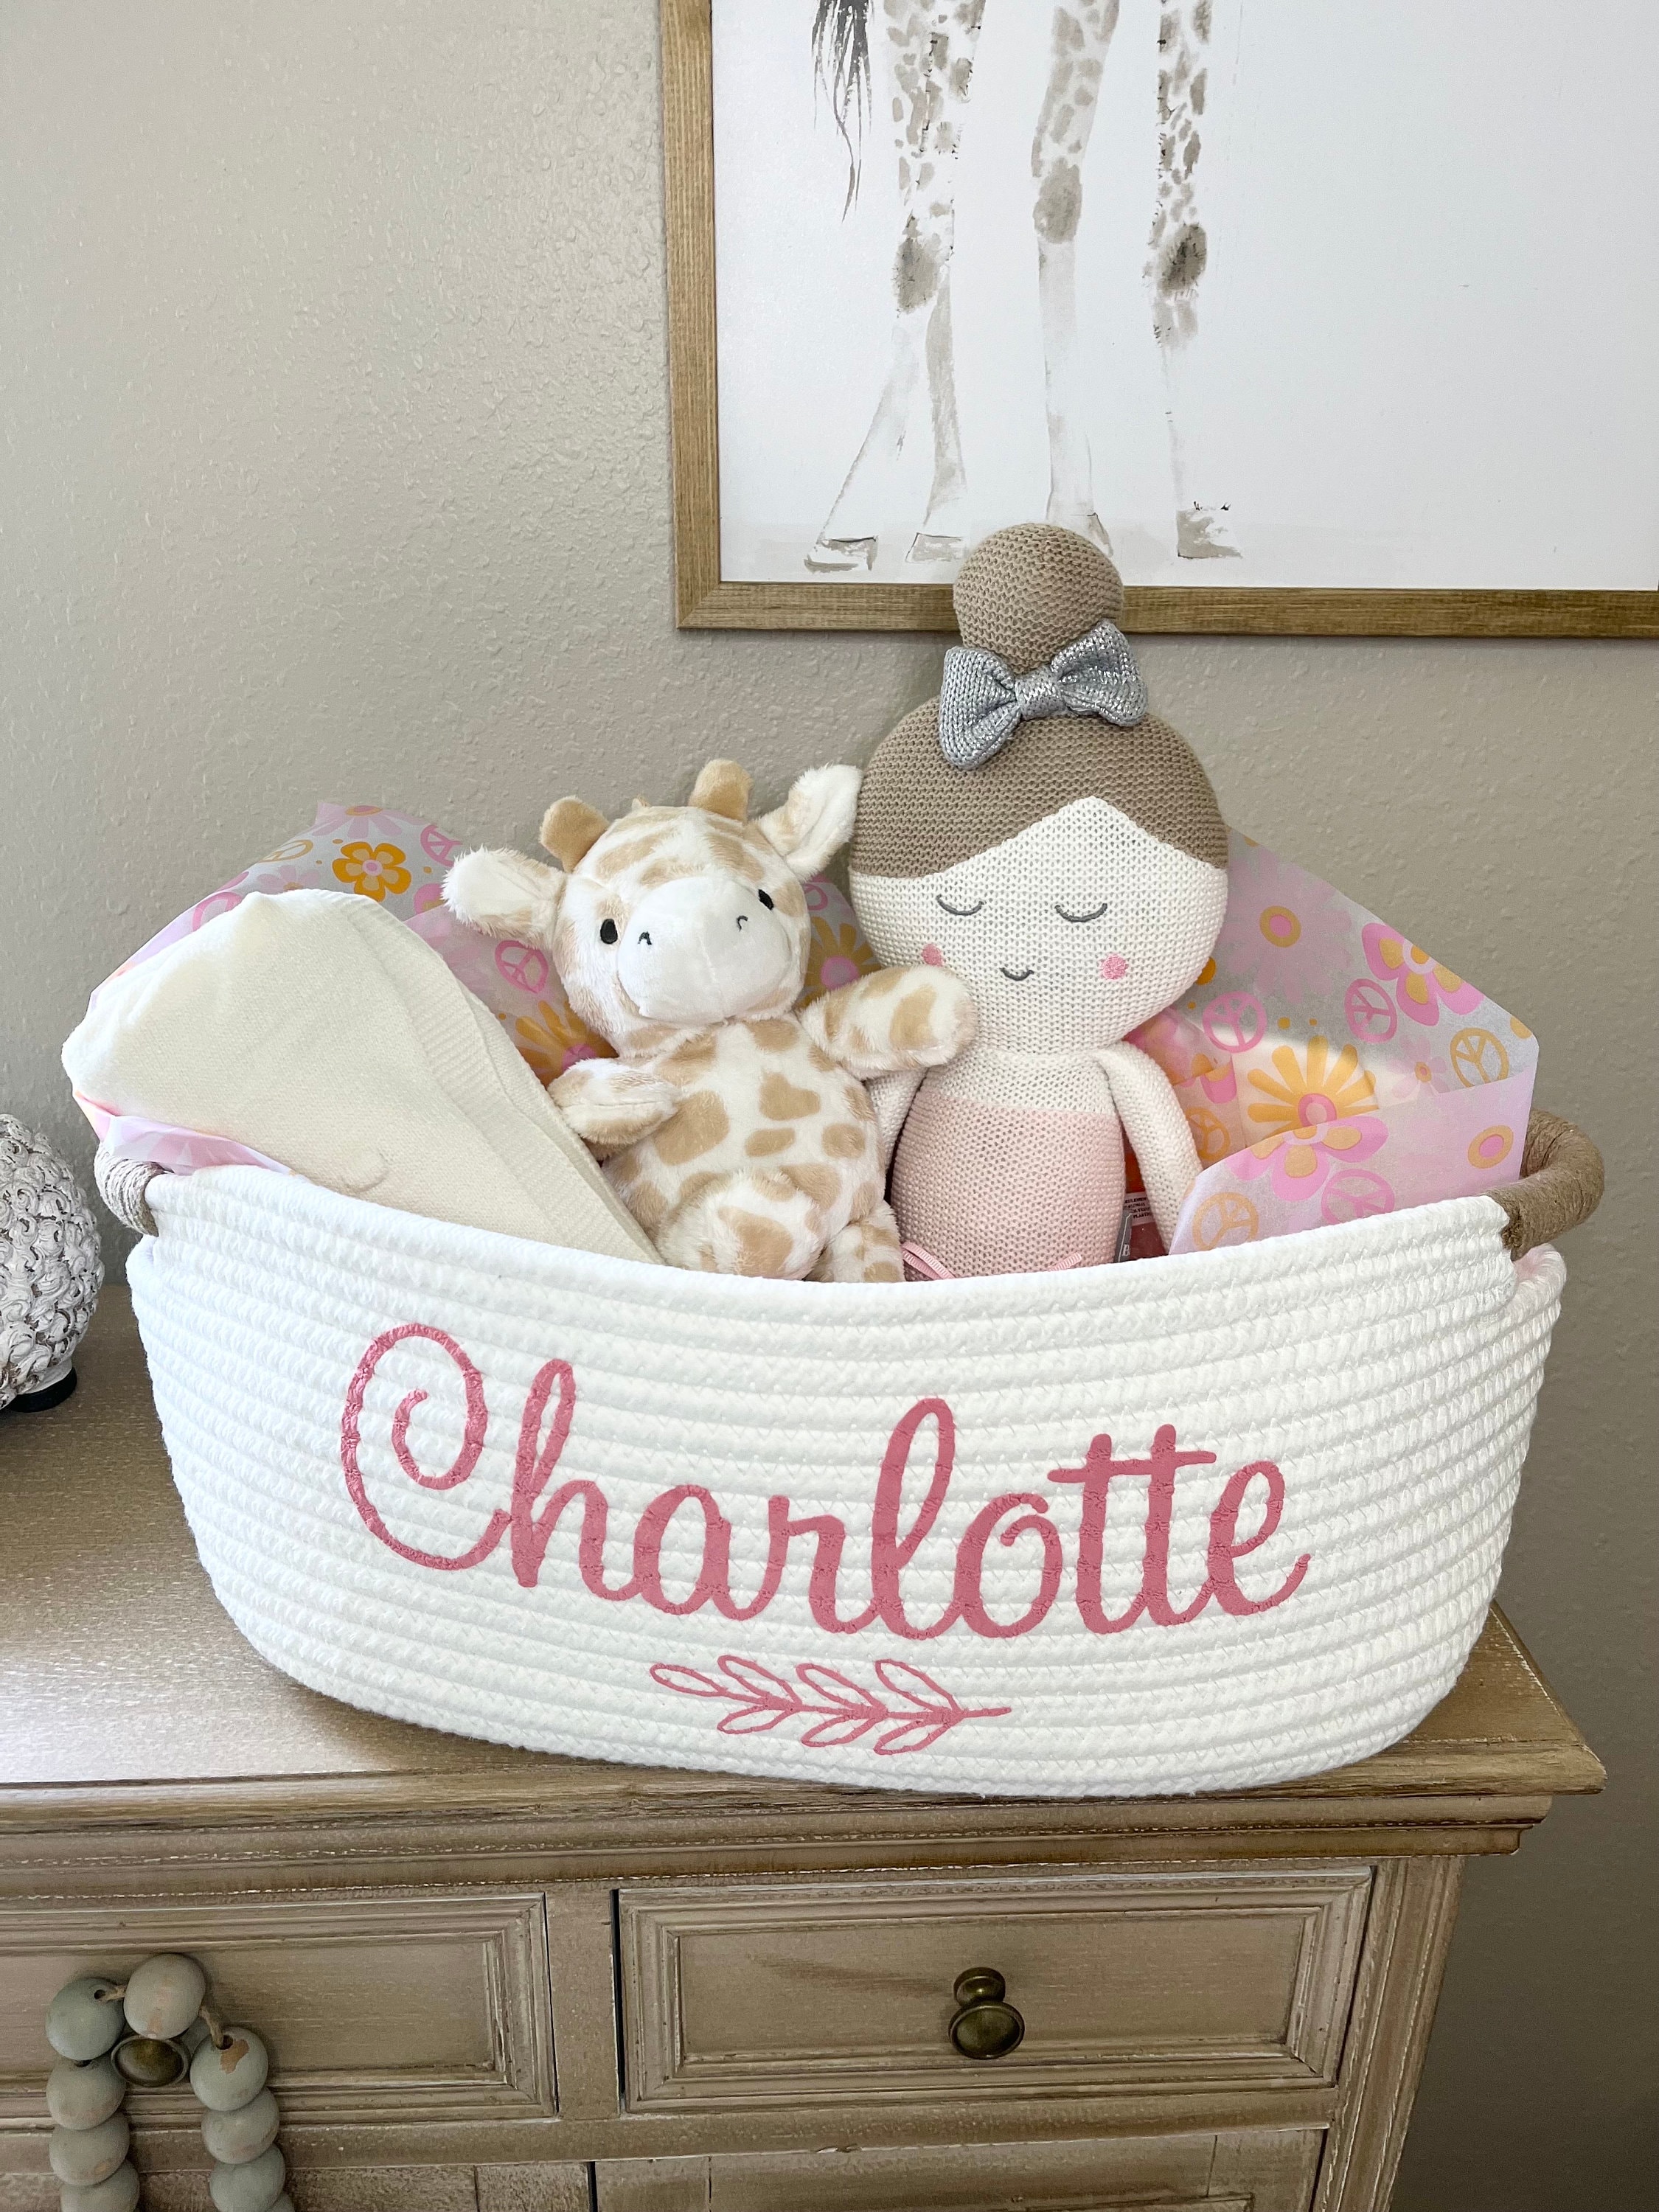 New Baby Girl Gift Basket, Baby Shower Gift, Personalized Gift for Baby,  Present for Baby Girl, Rainbow Baby Gift, Unique Baby Girl Gifts 